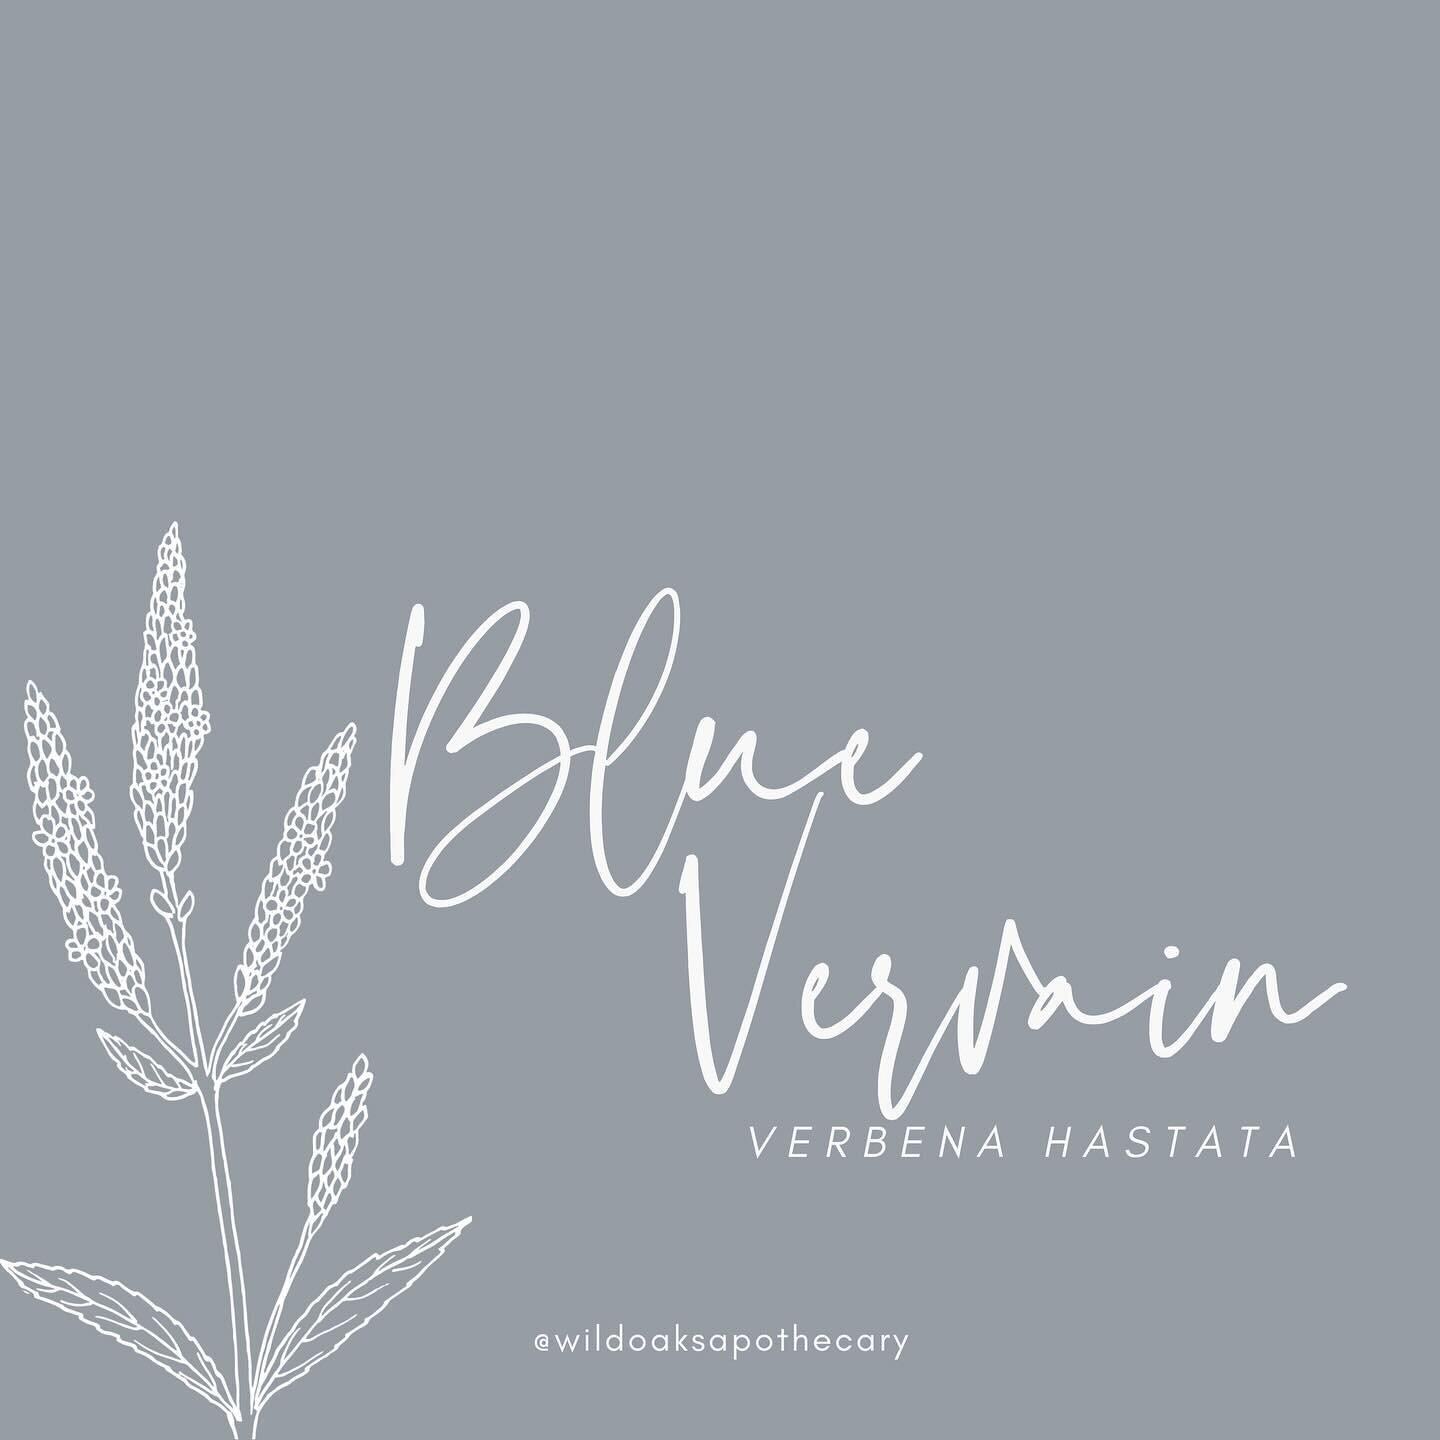 BLUE VERVAIN
𝘷𝘦𝘳𝘣𝘦𝘯𝘢 𝘩𝘢𝘴𝘵𝘢𝘵𝘢

- Anti-spasmodic
- Bitter
- Diaphoretic
- Emmenagogue
- Galactagogue
- Nervine
- Reproductive support

Blue vervain acts as a nervine, bitter, mild sedative, relaxant, diuretic, and more. Blue vervain is ty